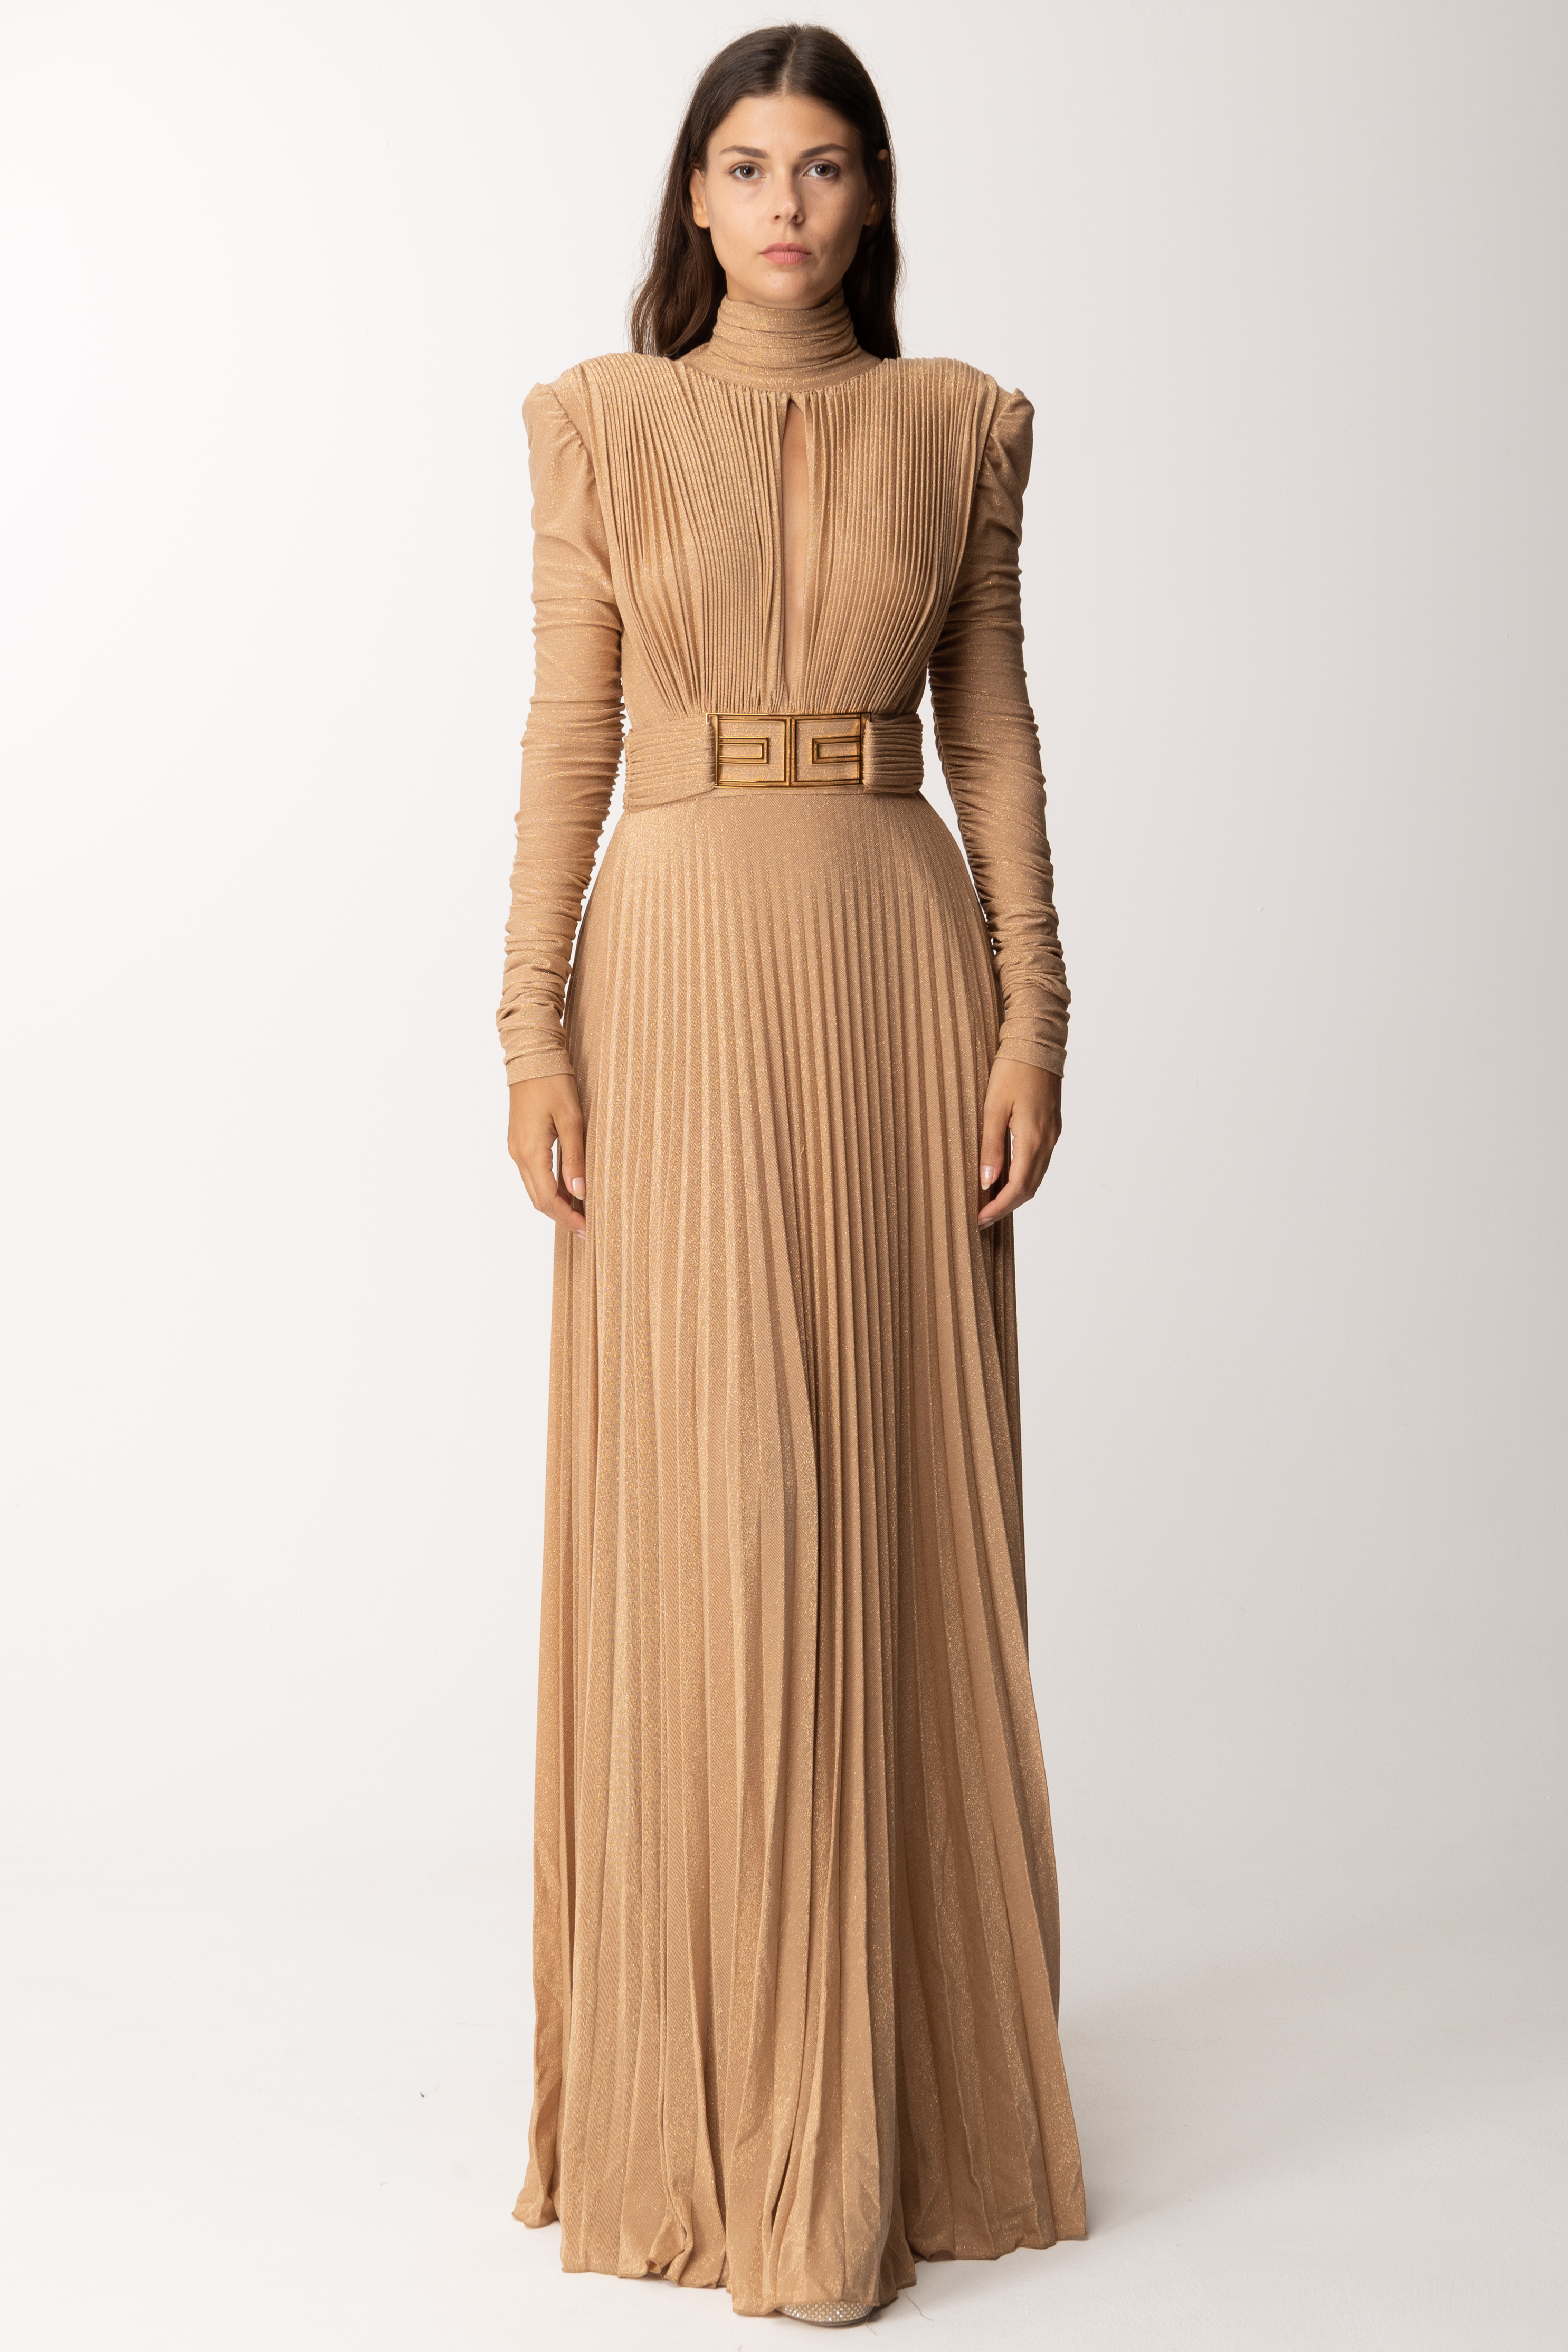 Preview: Elisabetta Franchi Red Carpet dress in pleated lurex jersey Caramello